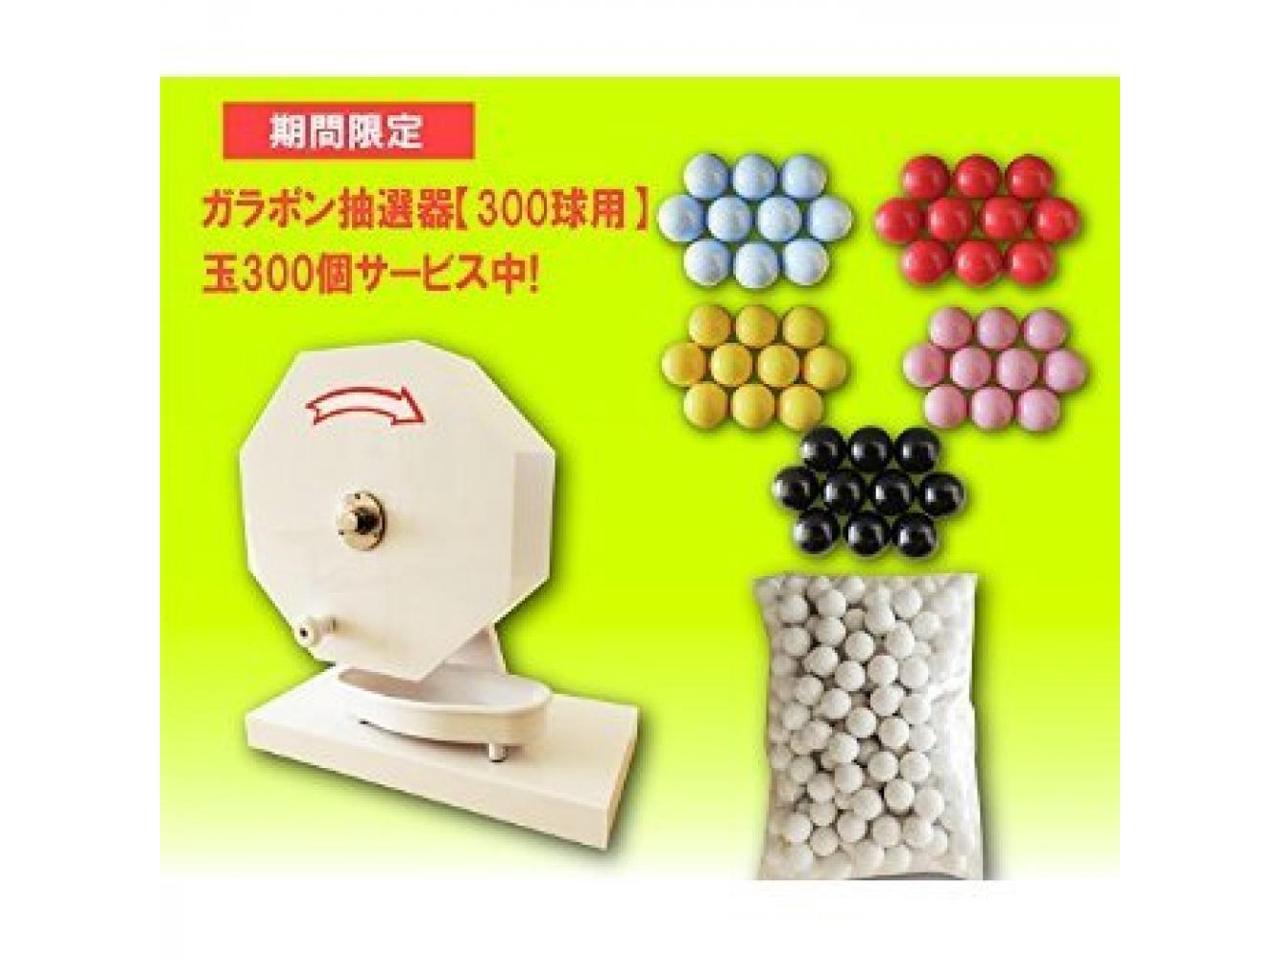 Amuse Garapon Lottery Machine for 300 Balls With 300 Lottery Balls for  Fukubiki Pon Made of ABS